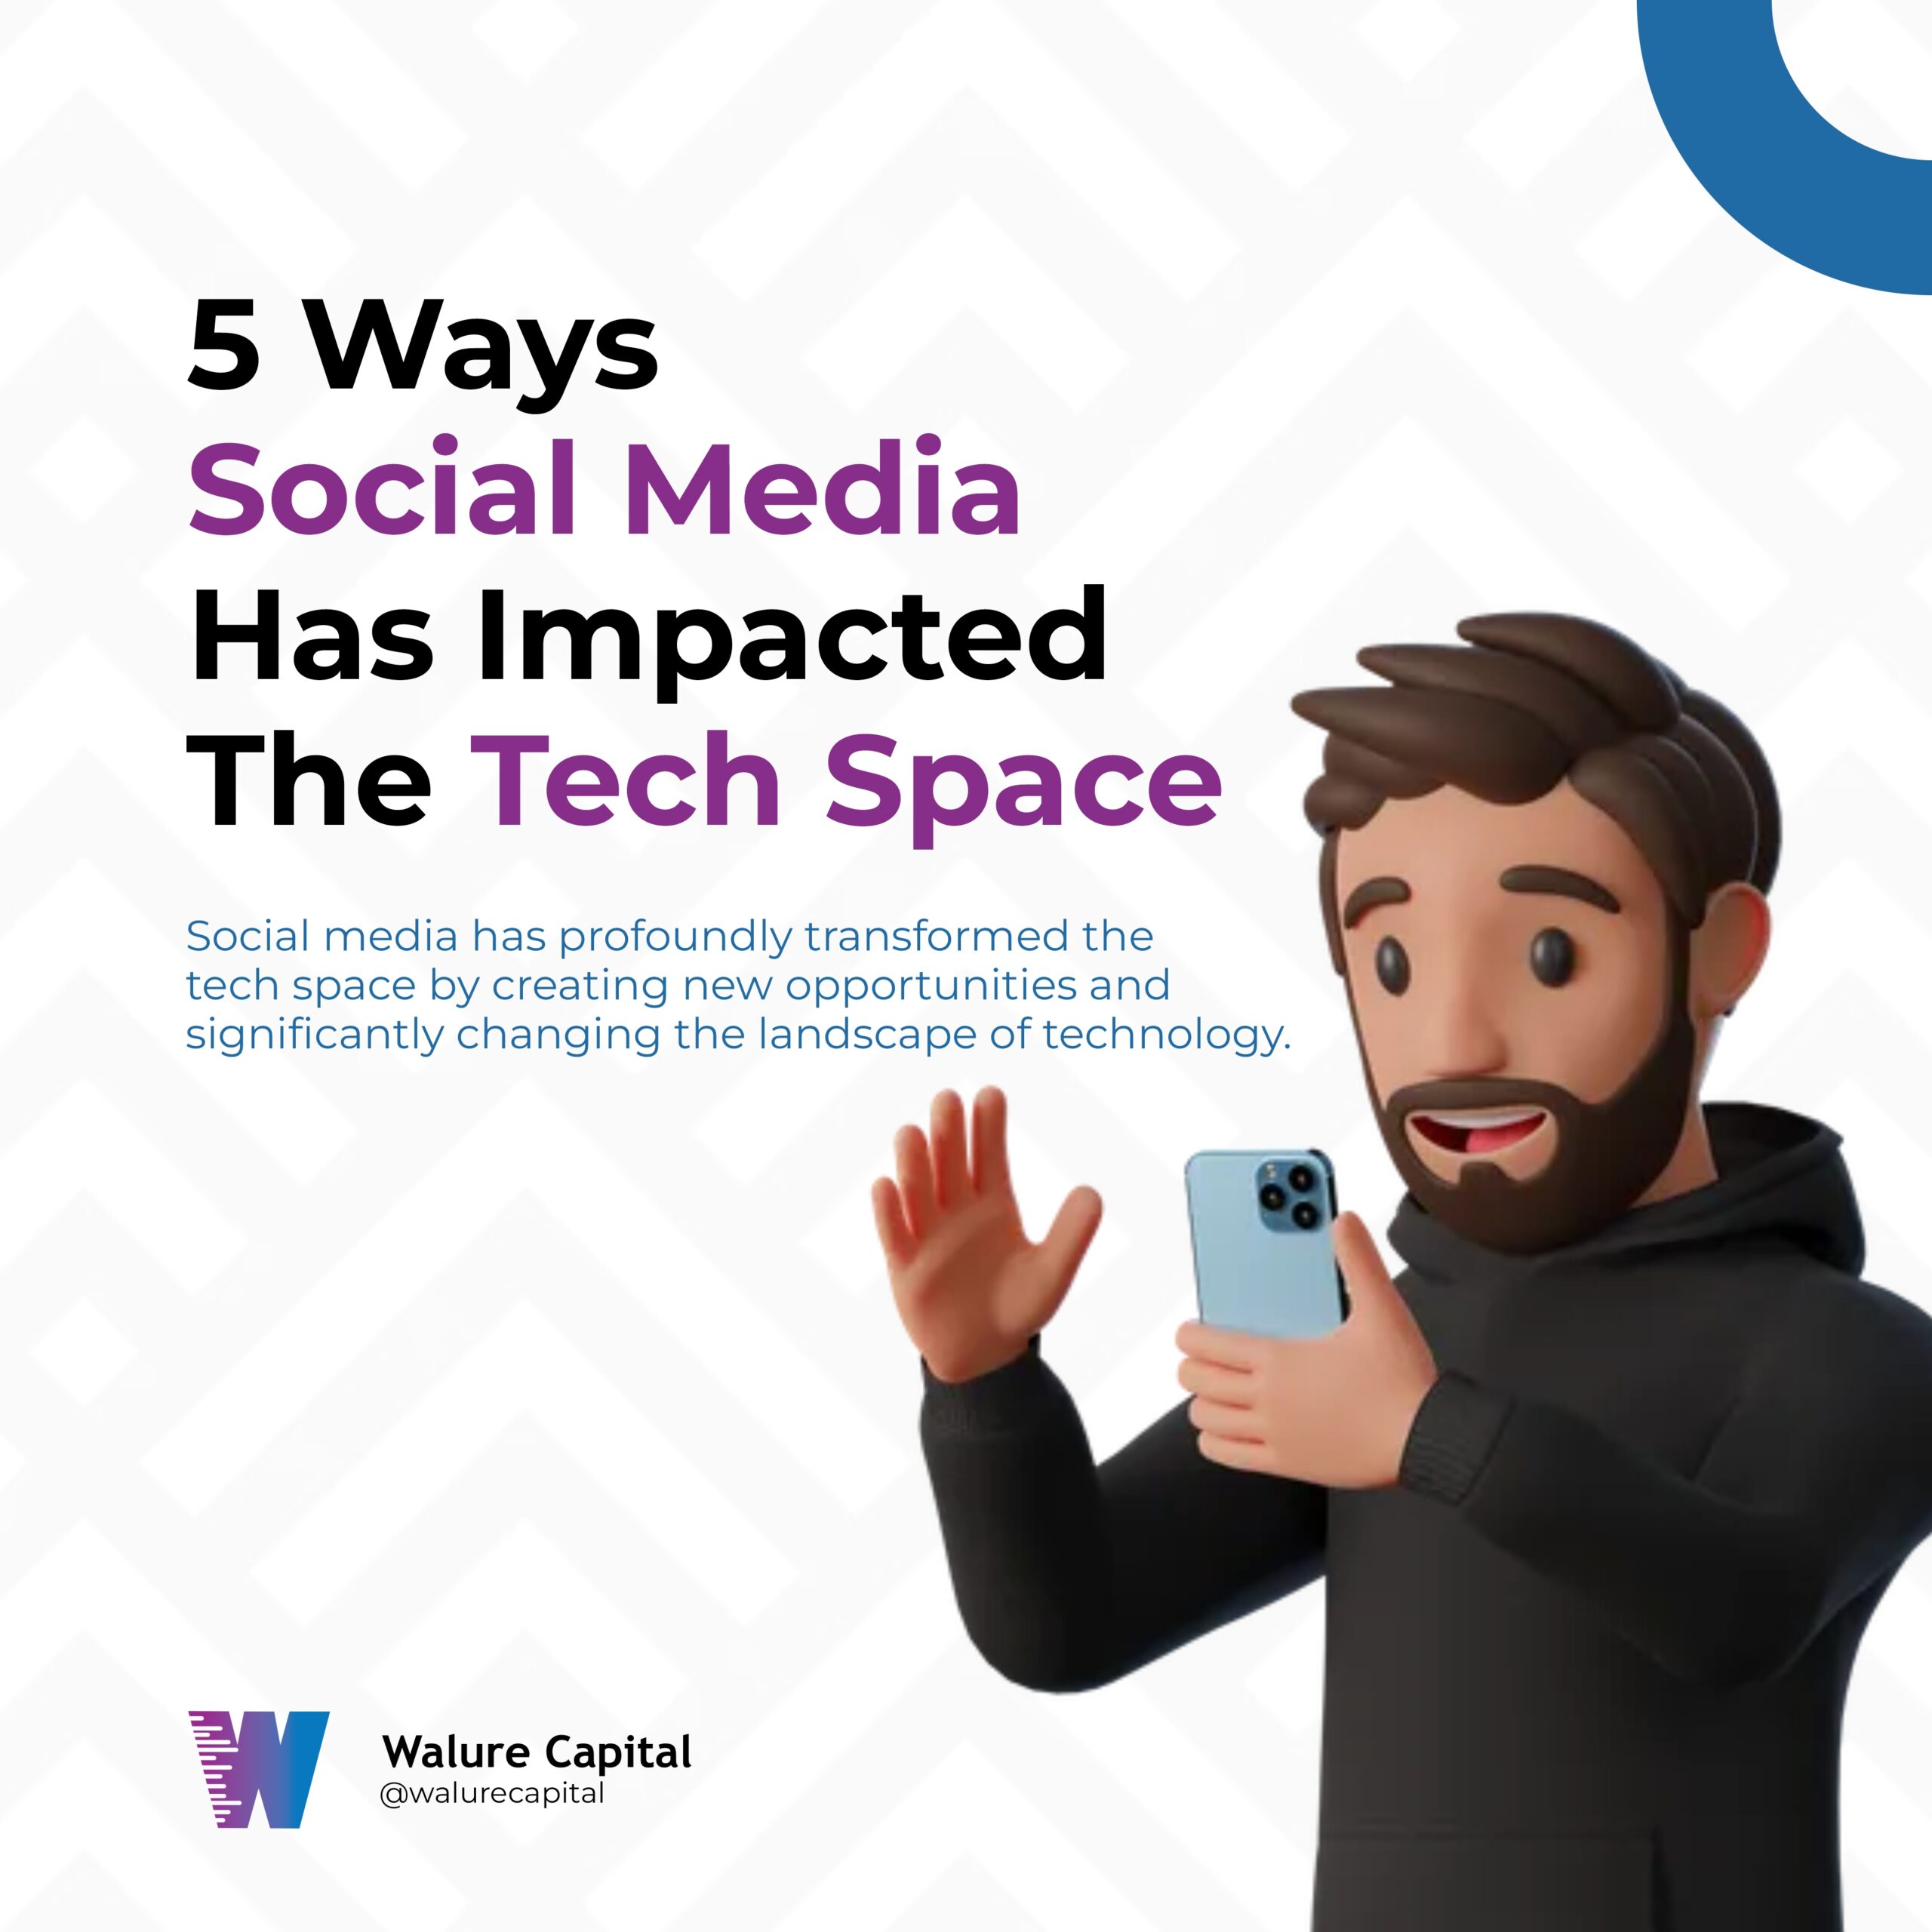 5 Ways Social Media Has Impacted The Tech Space